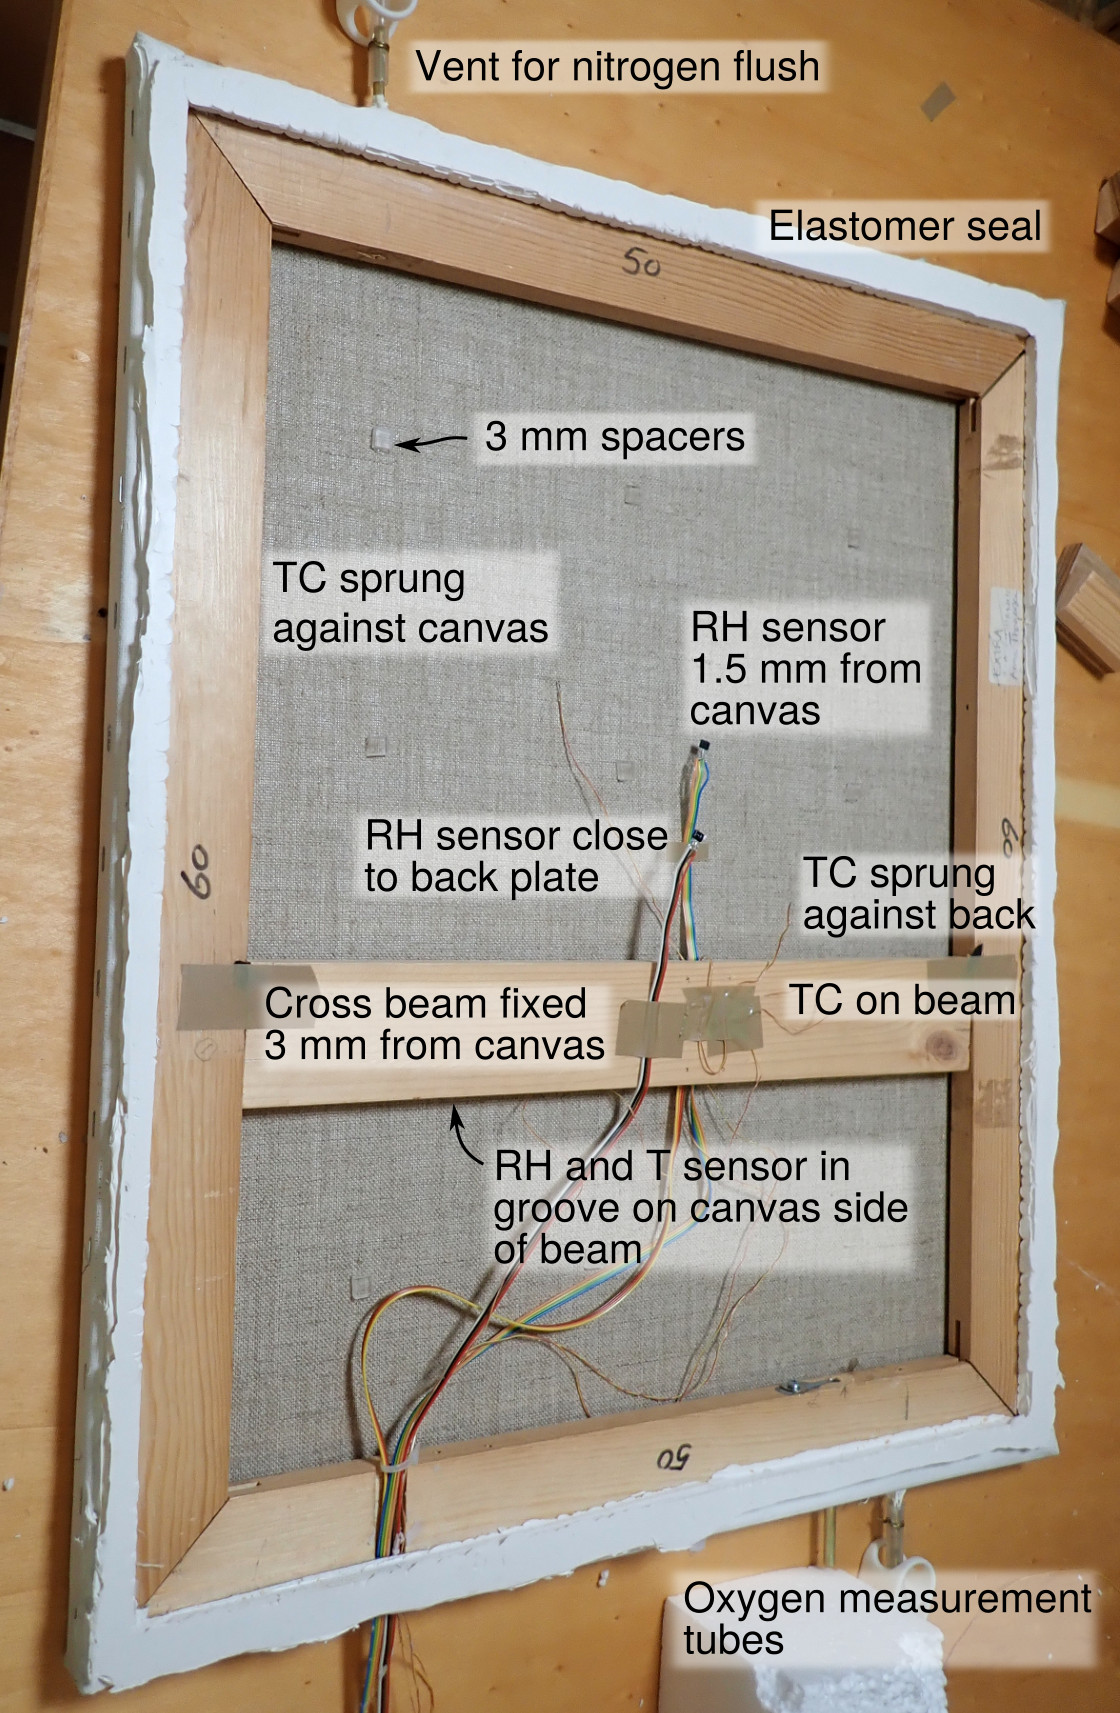 A back view of the experimental canvas stretched over a wooden frame. The fine thermocouples (TC) which spring against the painting canvas and the back plate are scarcely visible. The RH sensors have built-in temperature measurement. There is a third RH sensor mounted in a shallow groove in the cross beam, facing the canvas. The painting dimensions are 600 \times 500 mm, the total thickness of the assembly, including an aluminium back plate, is 30 mm.